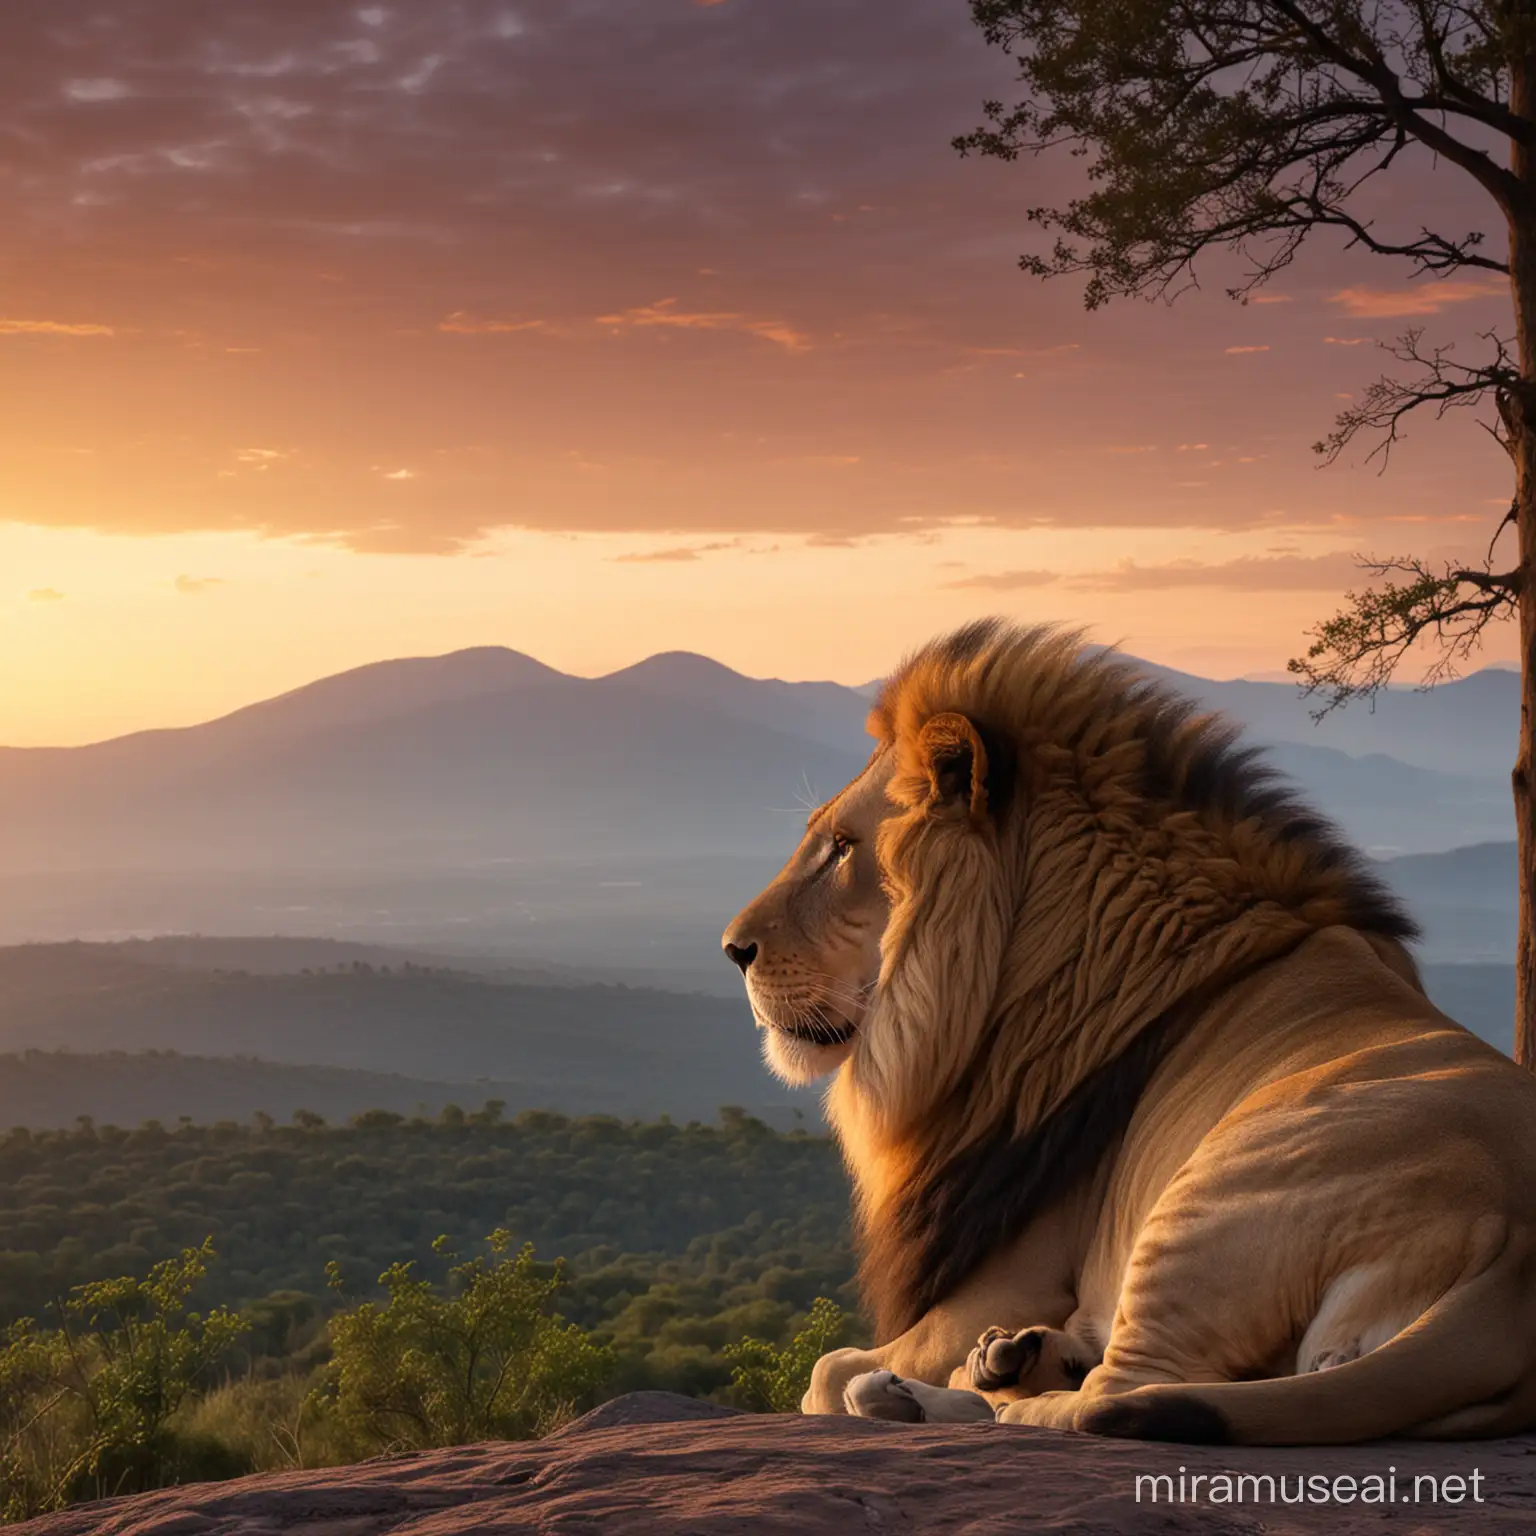 A lion sits, gazing at the sunset in the forest, atop the mountain, only its back visible.